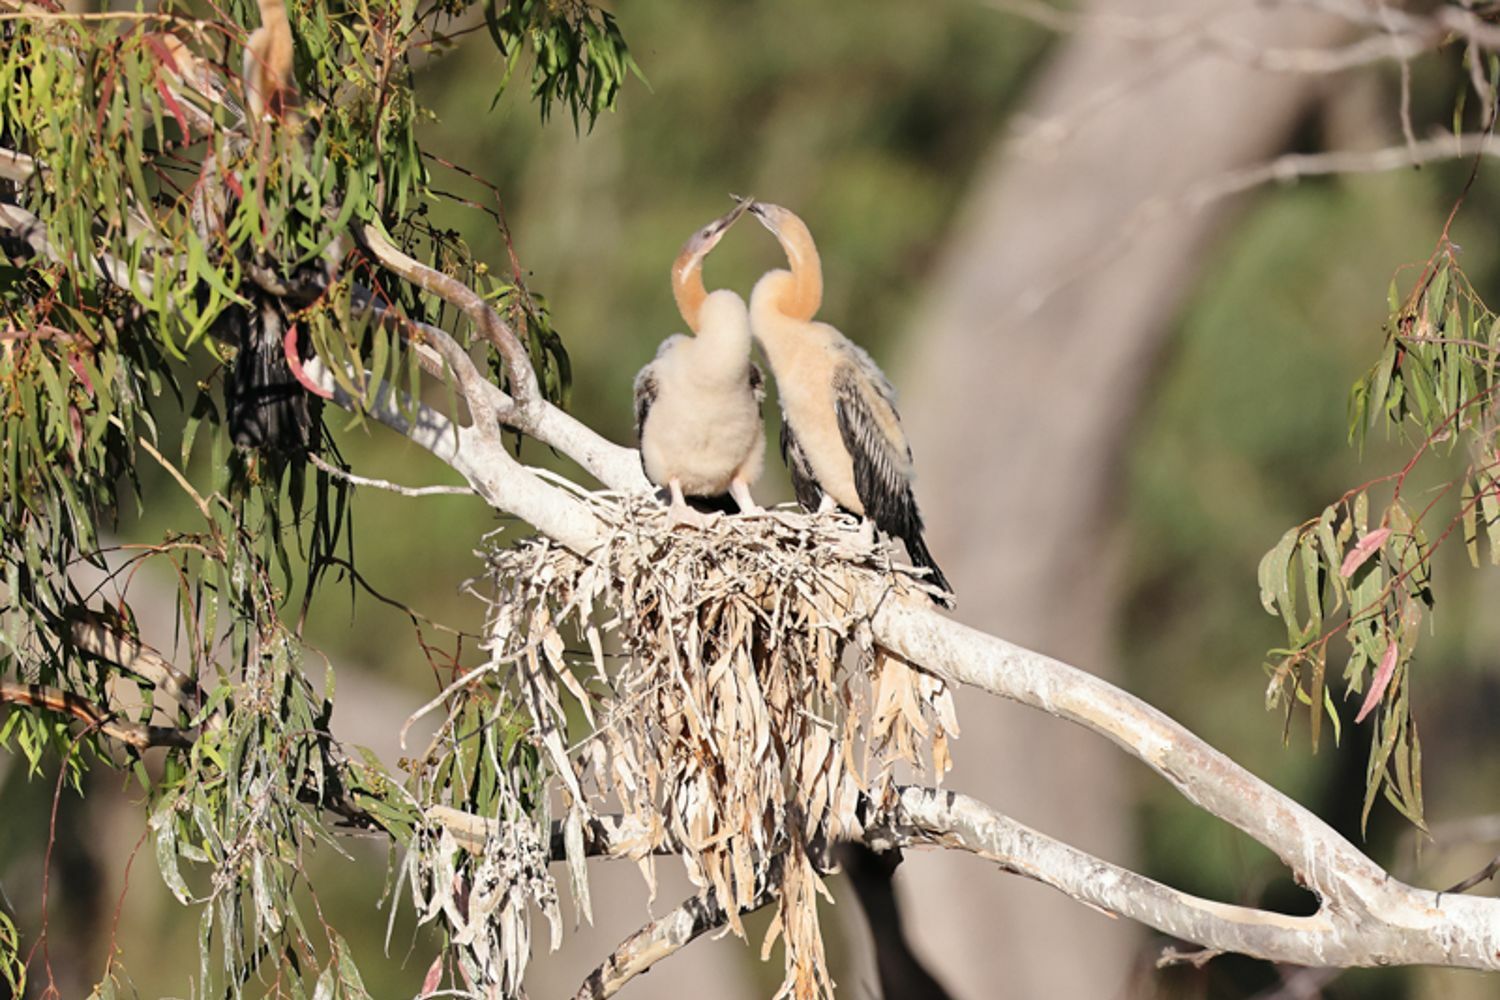 Australasian Darters as part of the waterbird colony at Brewster weir pool. Photo credit, Warren Chad